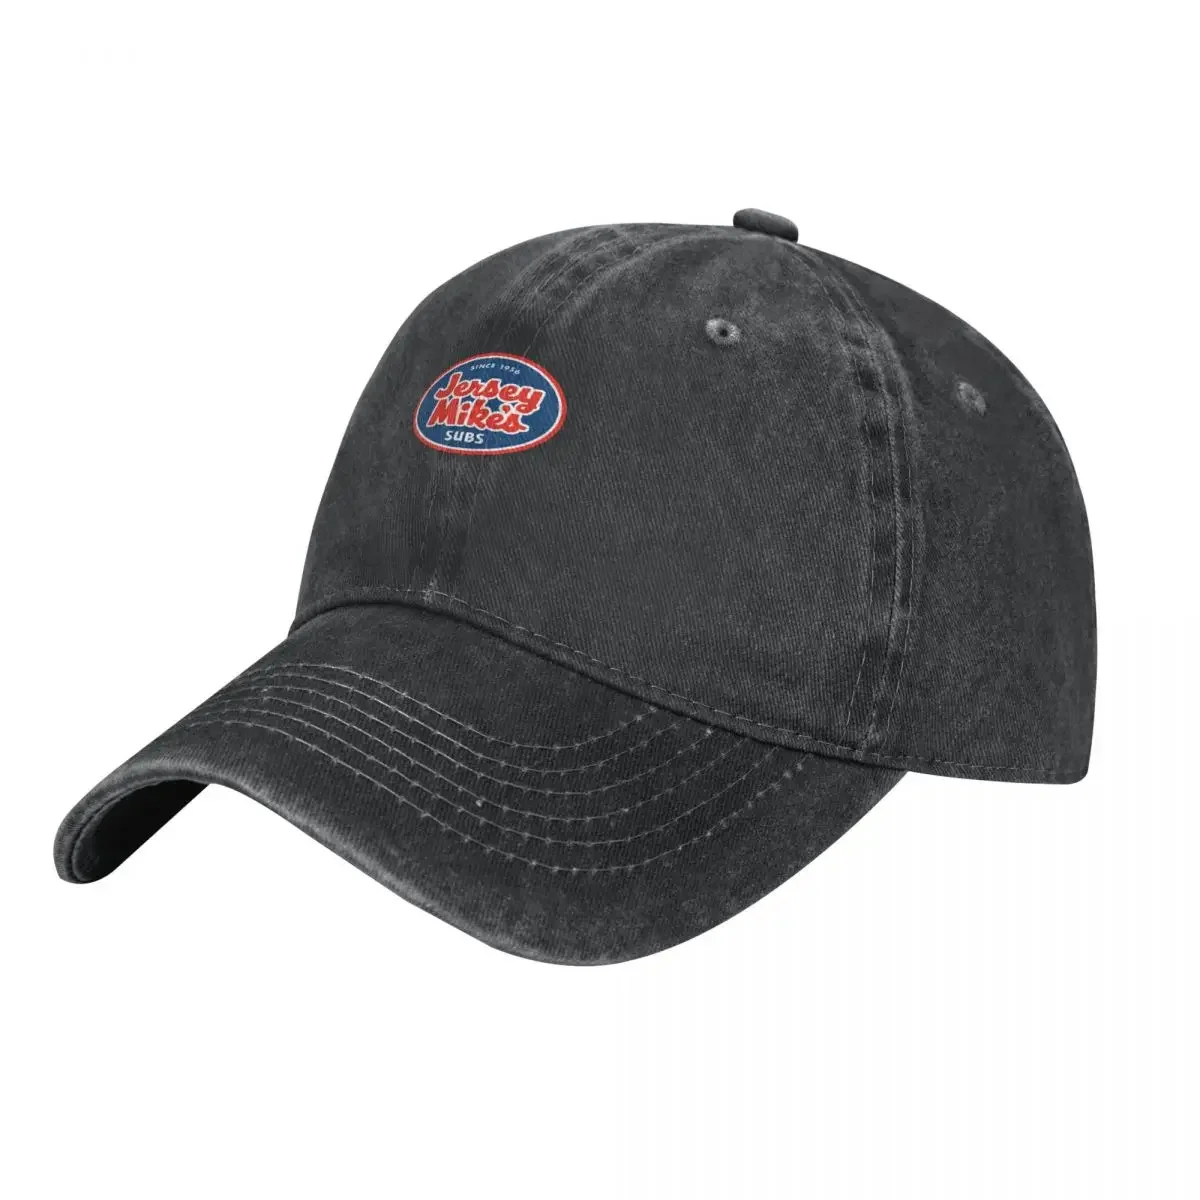 

Jersey Mike's Subs Logo Jersey Mike LogoJersey Mike Cowboy Hat Hood New Hat Hat Luxury Brand Man For The Sun For Men Women's